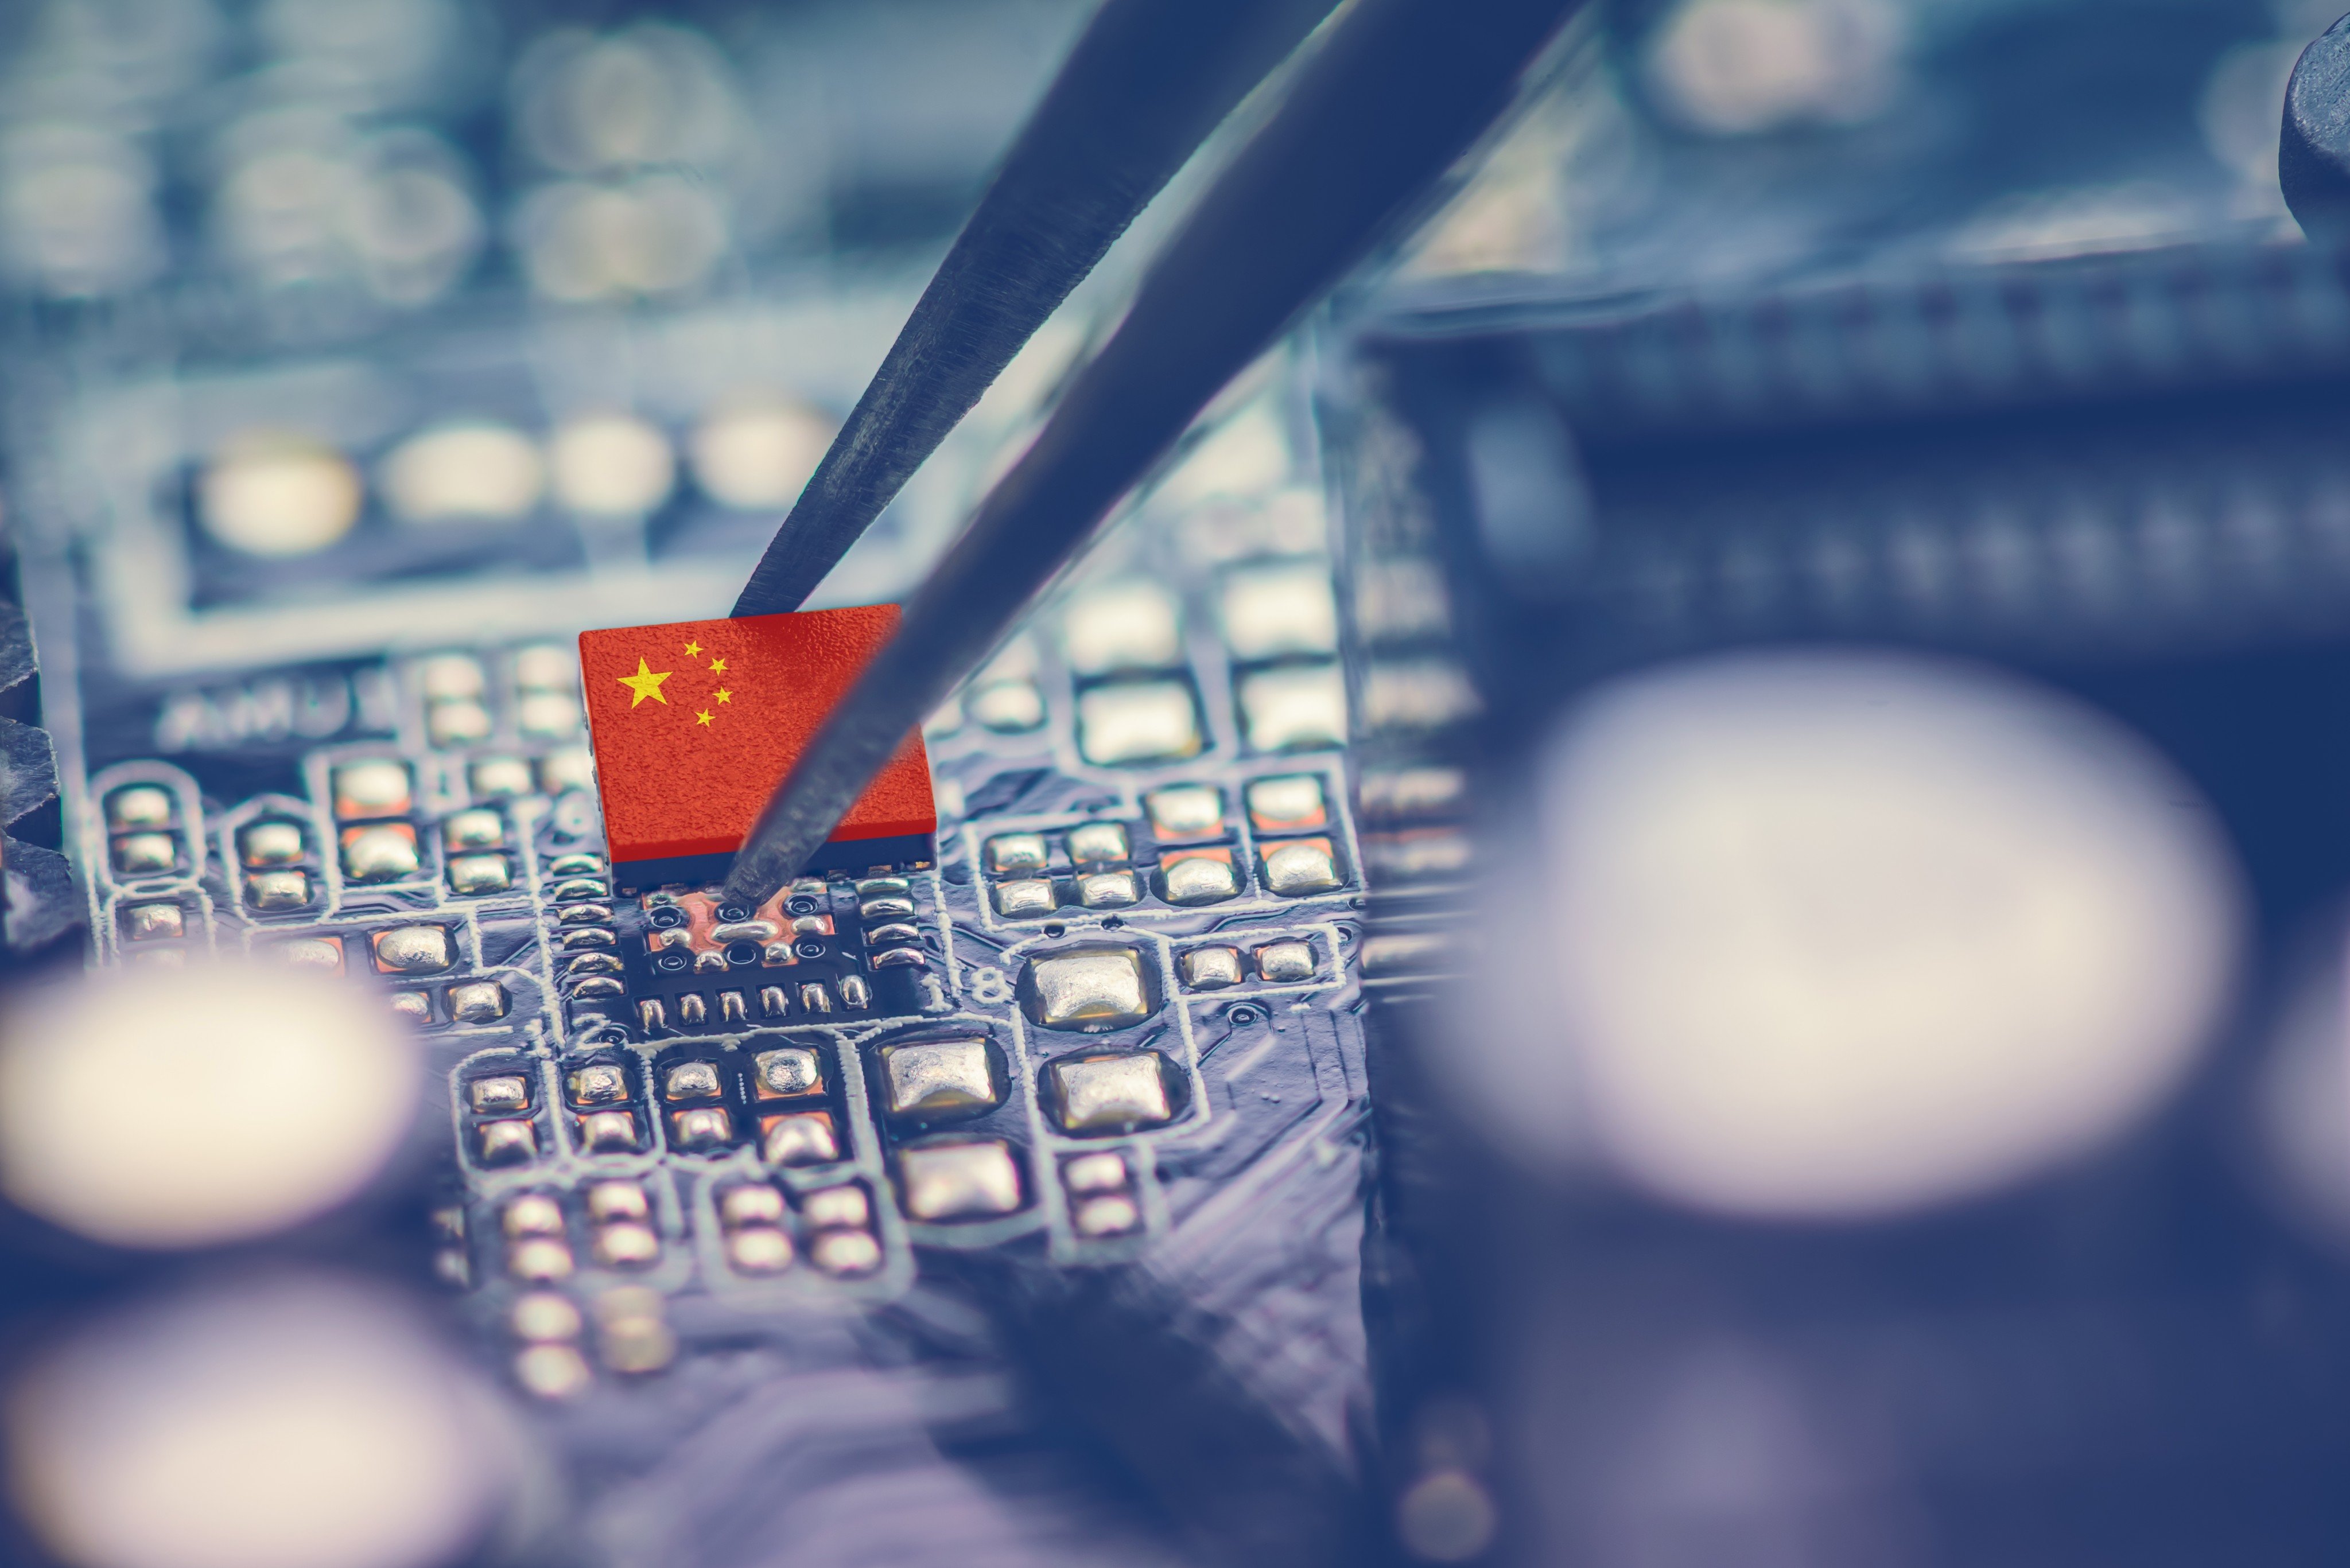 The US Congress is moving to place further restrictions on Chinese technology amid fears over artificial intelligence developments. Photo: Shutterstock